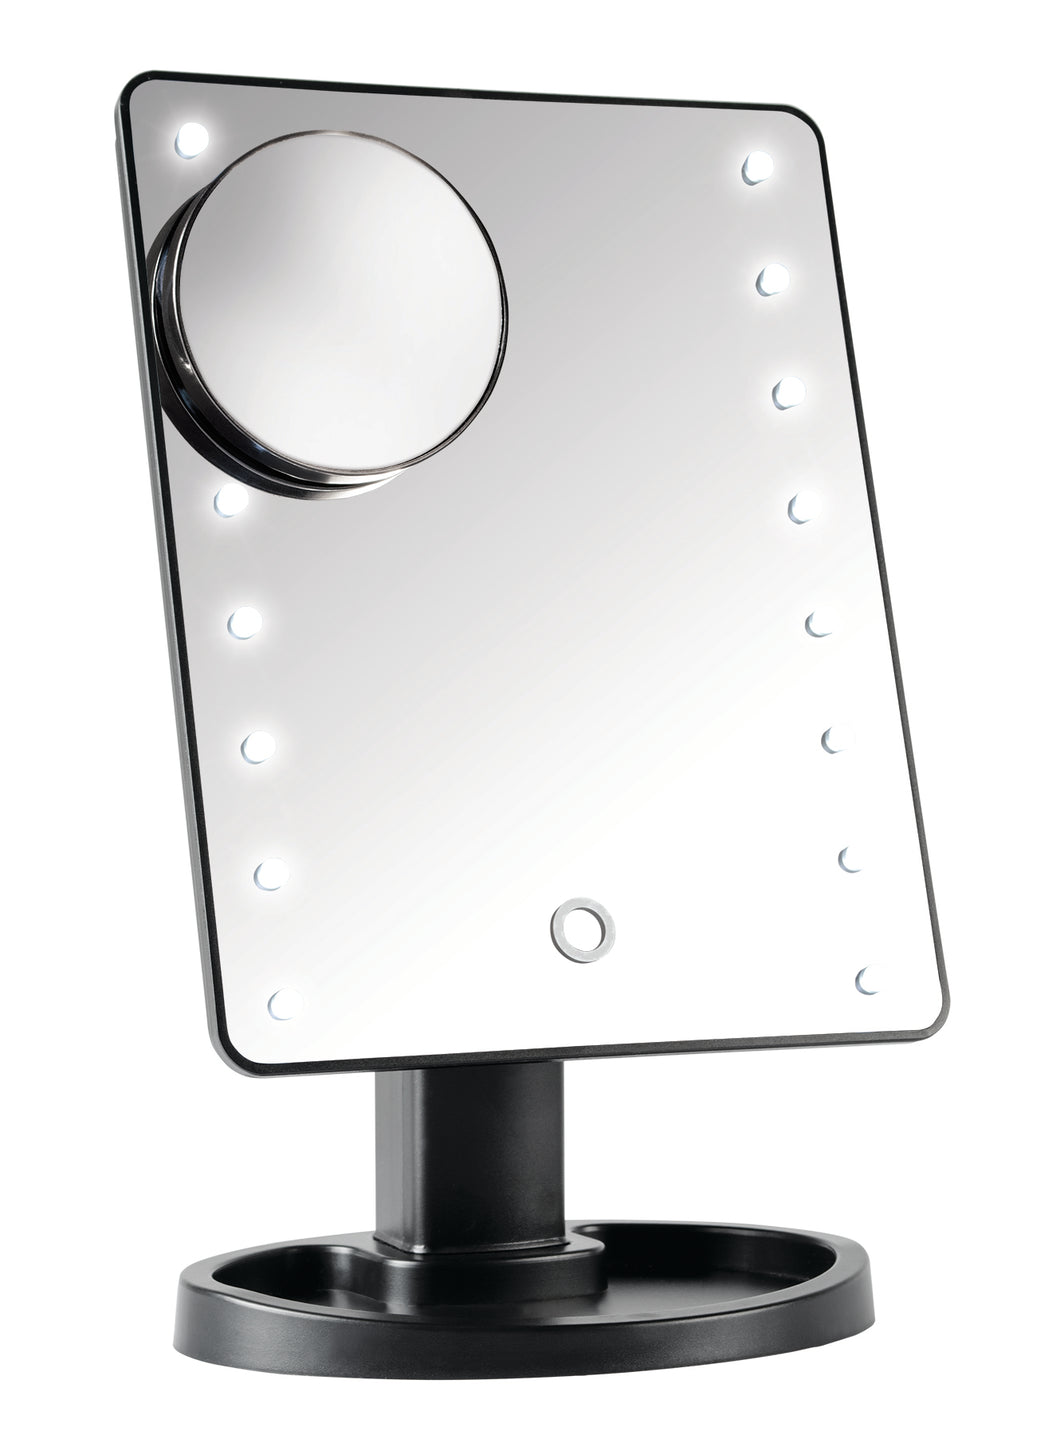 Front view of the vanity mirror with lights on